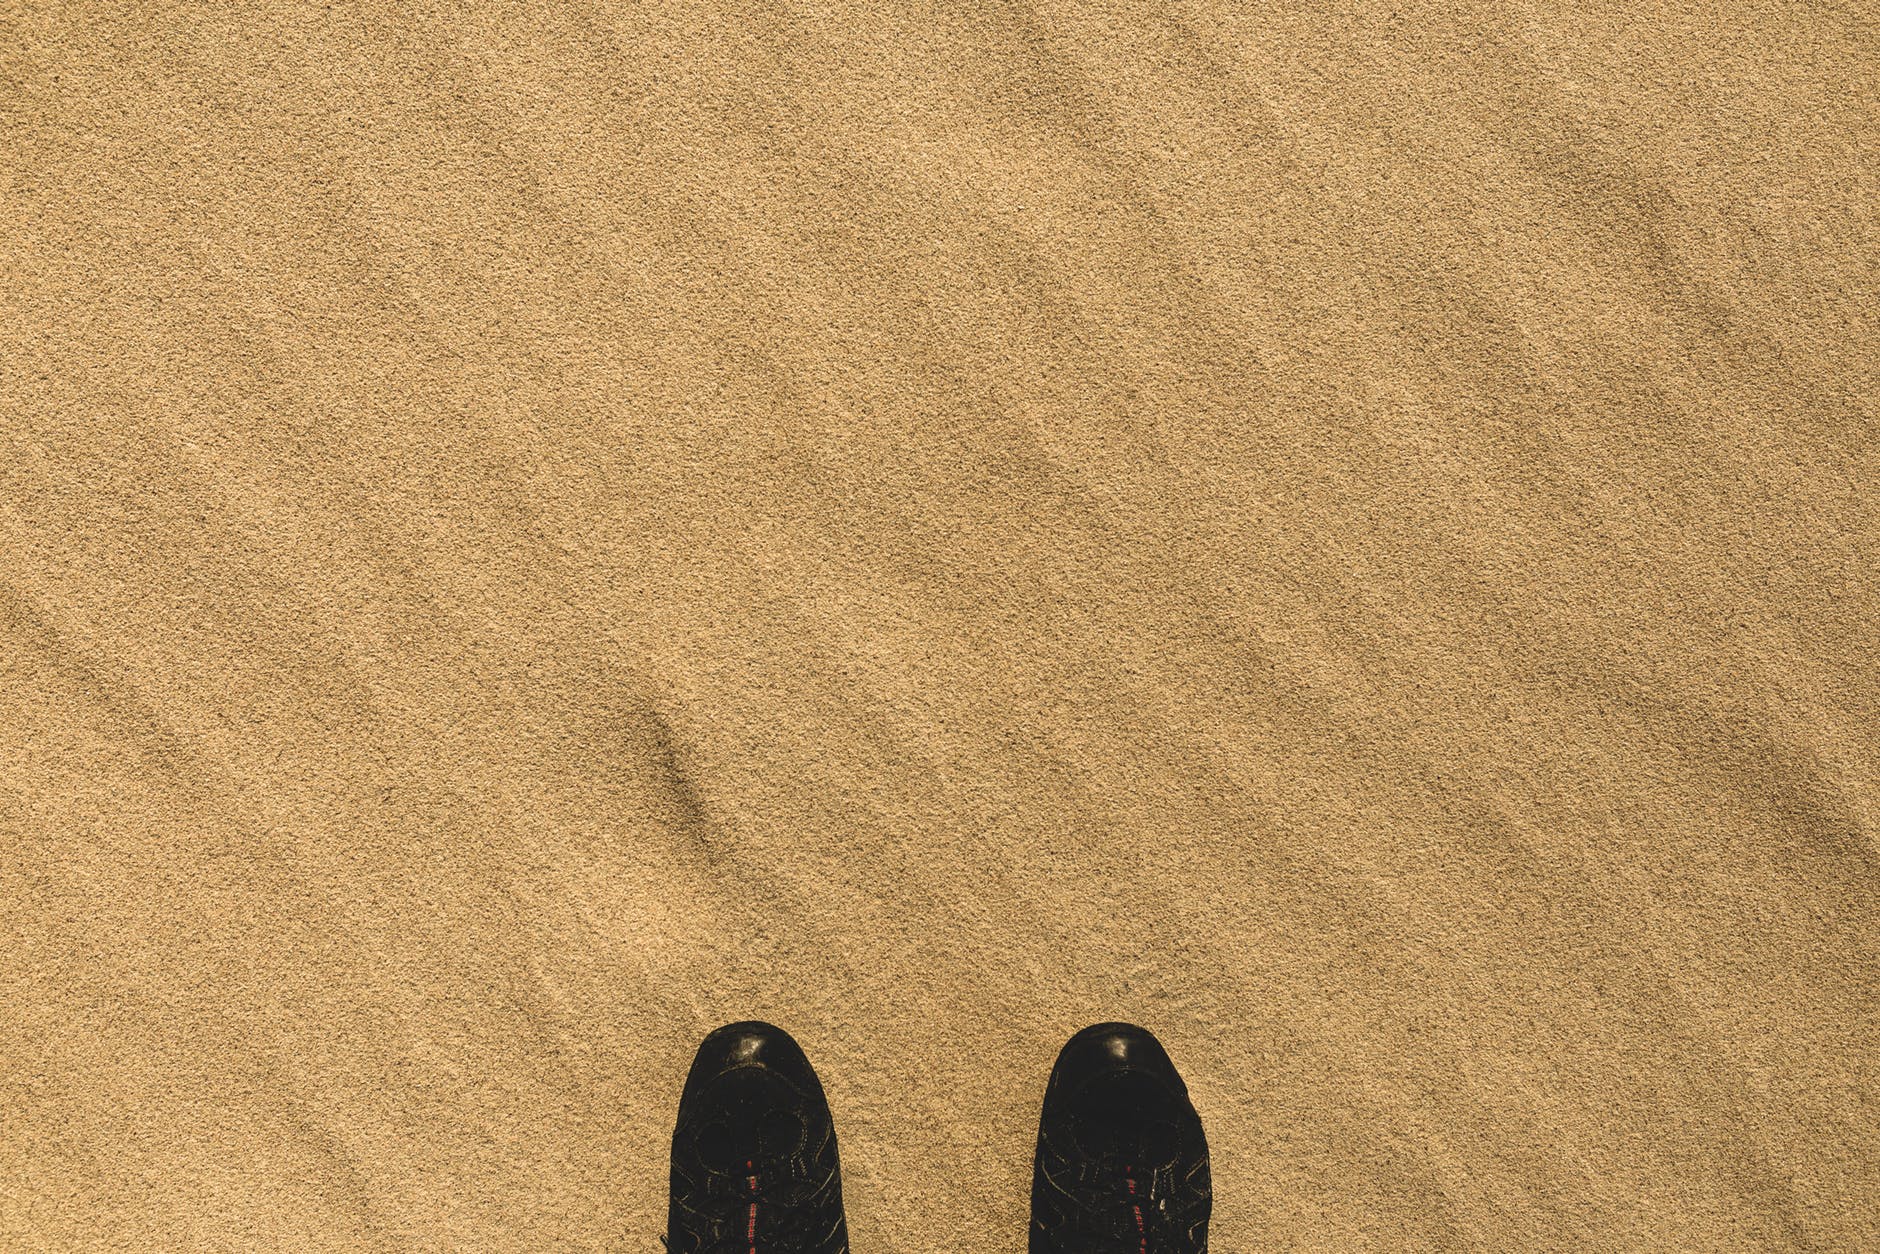 pair of black shoes on sand